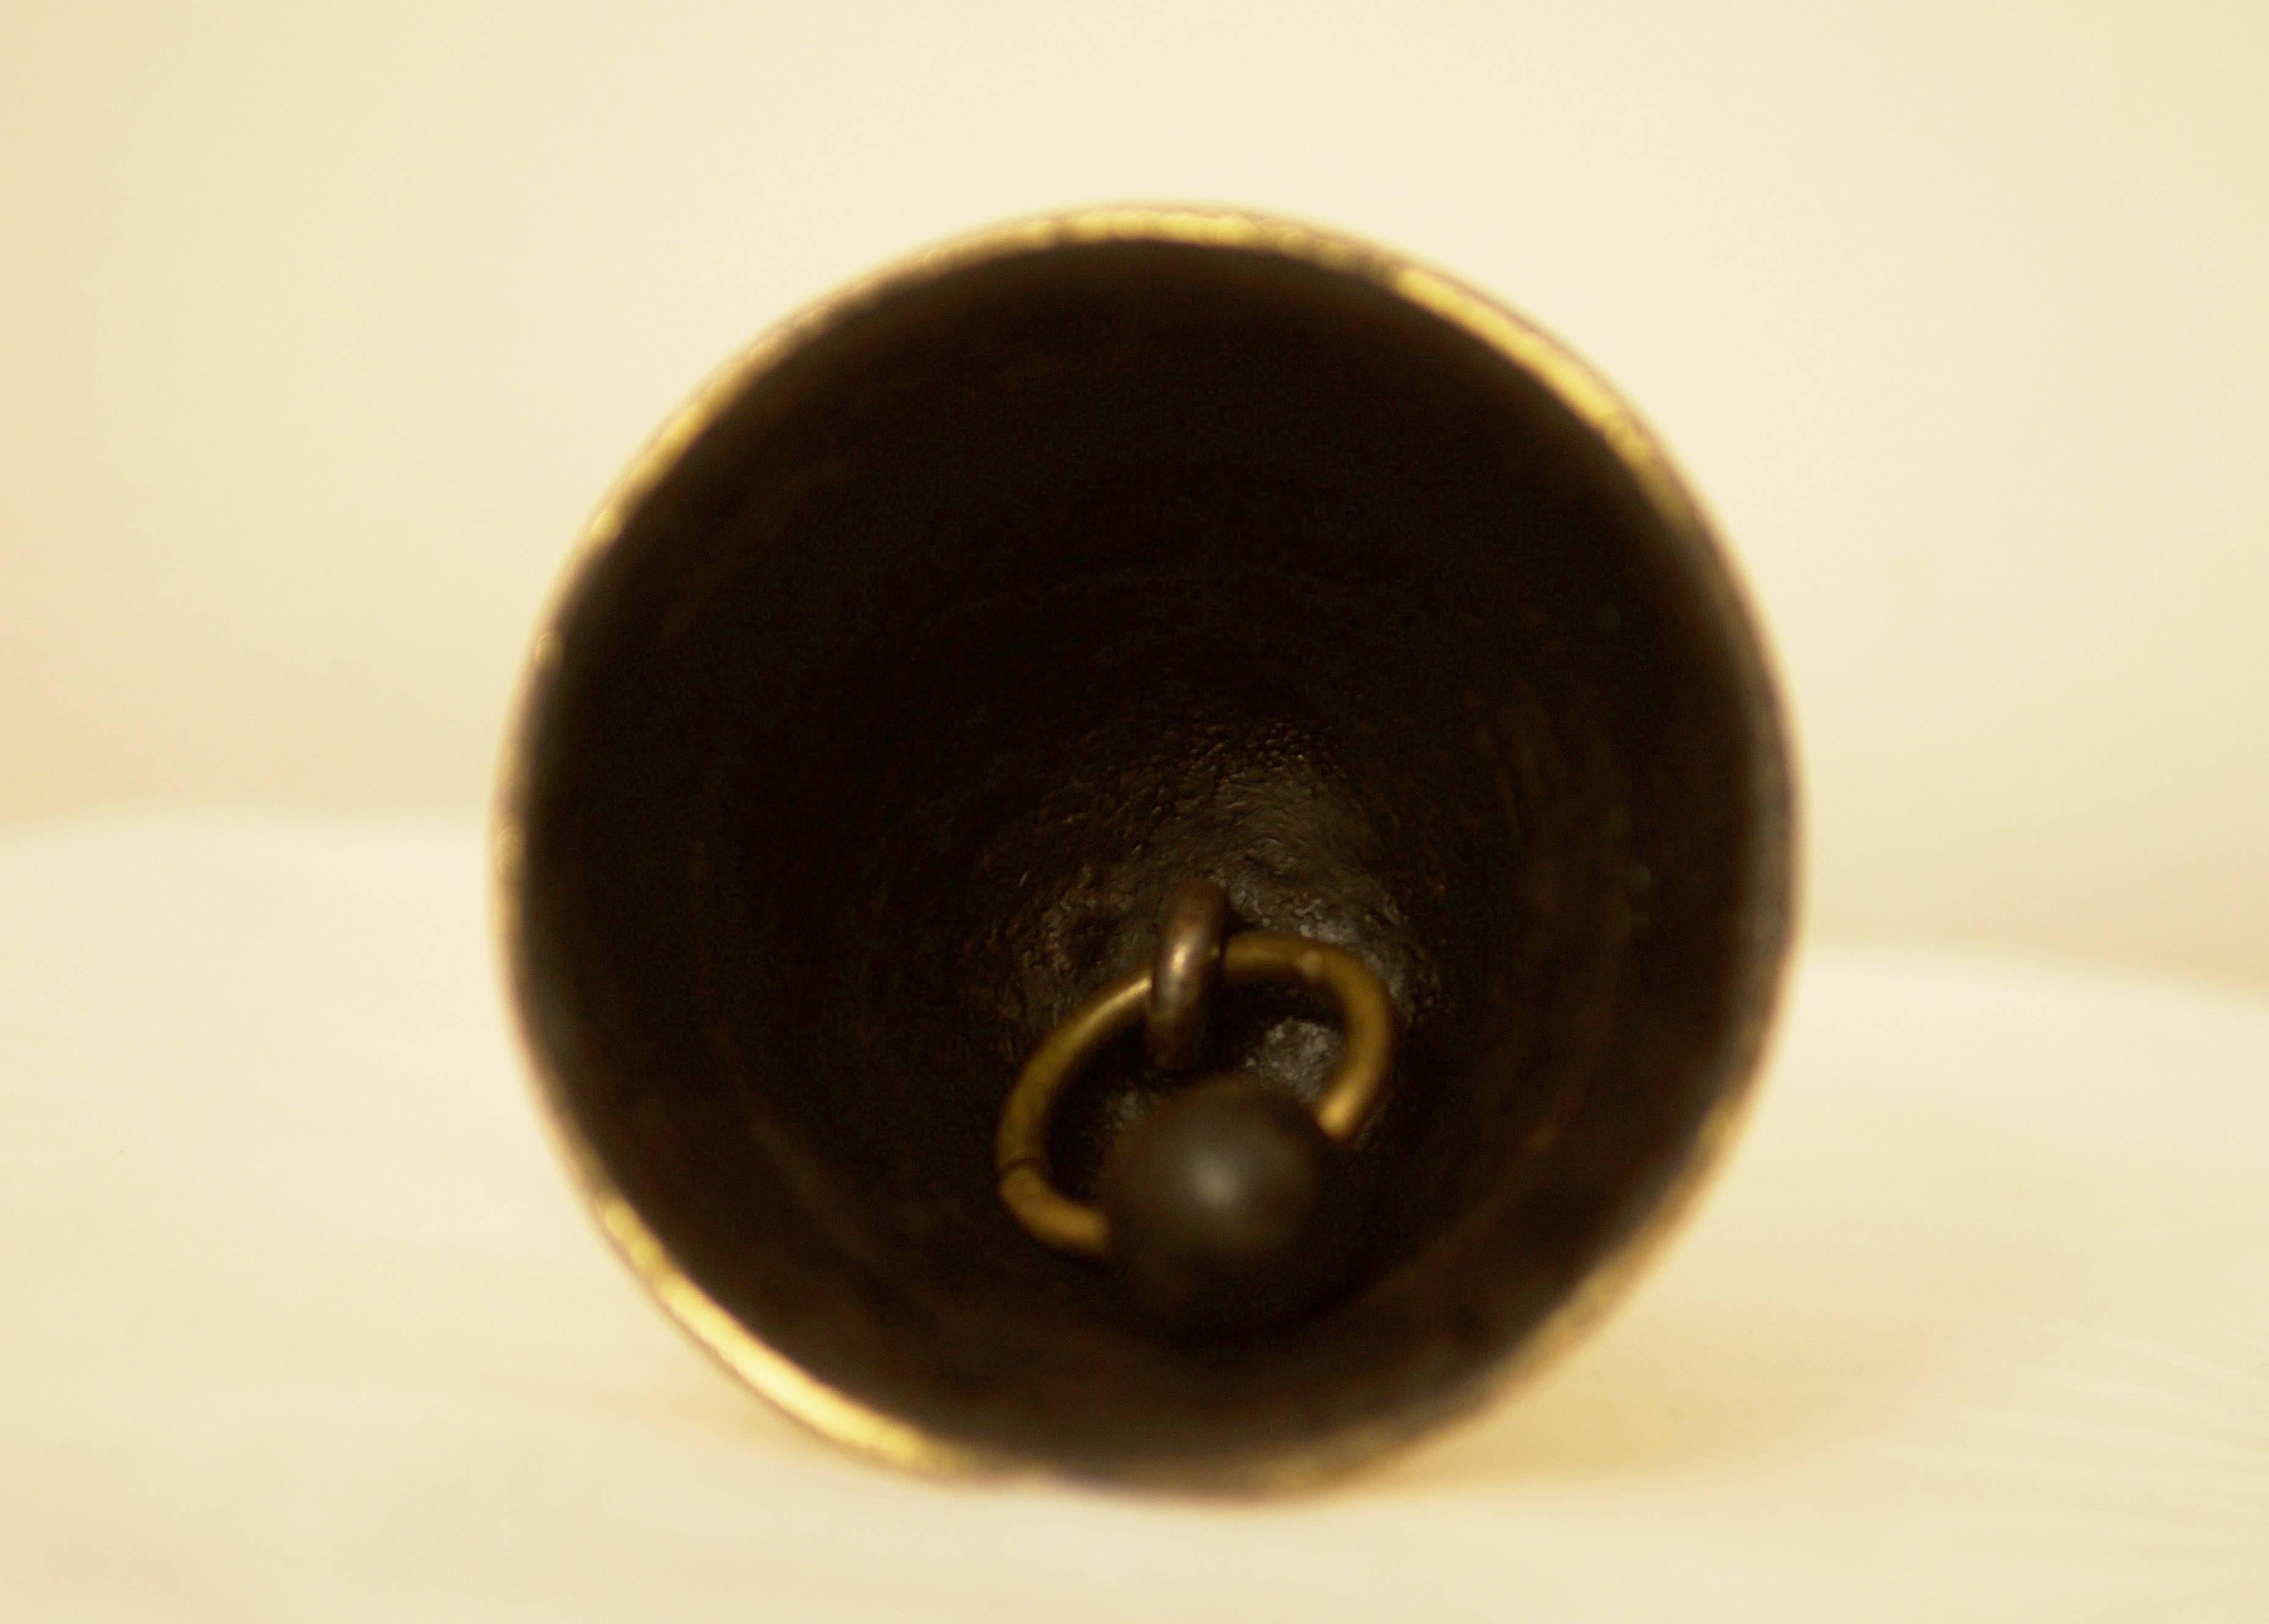 Solid brass partially blackened, designed by Walter Bosse for Hertha Baller in the 1950s.